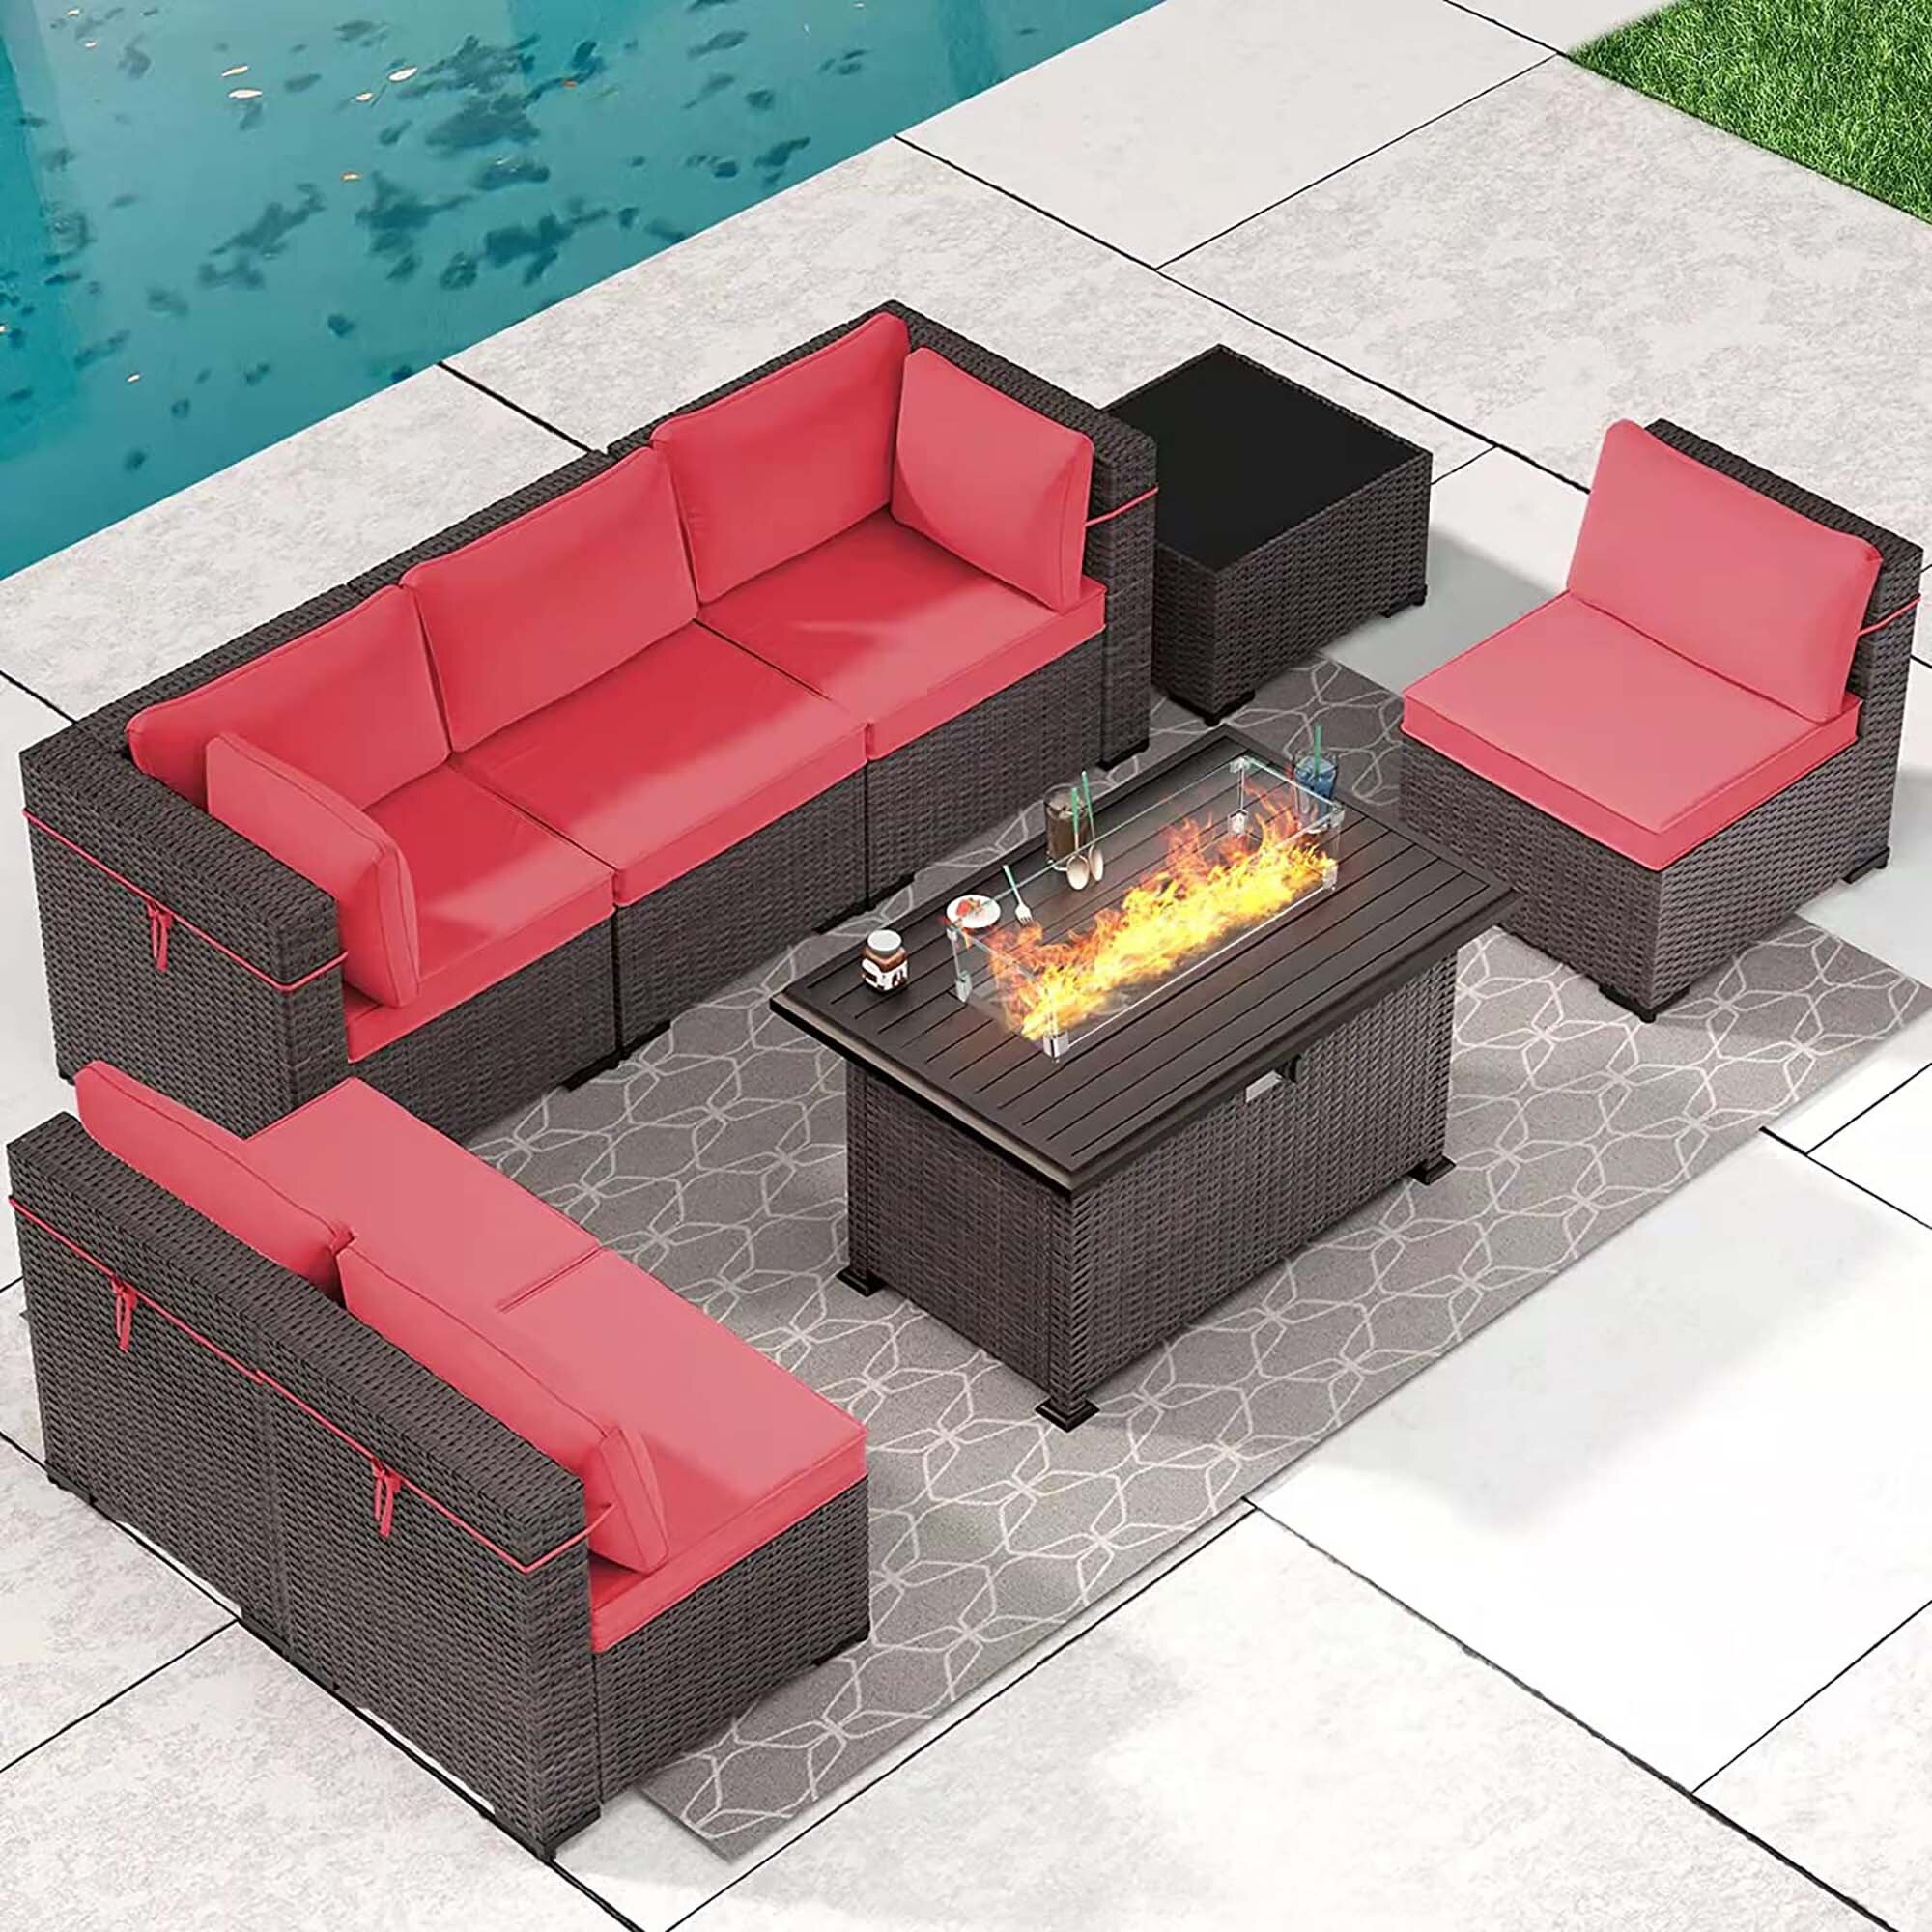 8 Pieces Outdoor Furniture Set Patio Sectional Sofa w/43in Propane Fire Pit PE Wicker Rattan Patio Conversation Sets Dark Blue ASJMR Outdoor Patio Furniture Set with Gas Fire Pit Table 